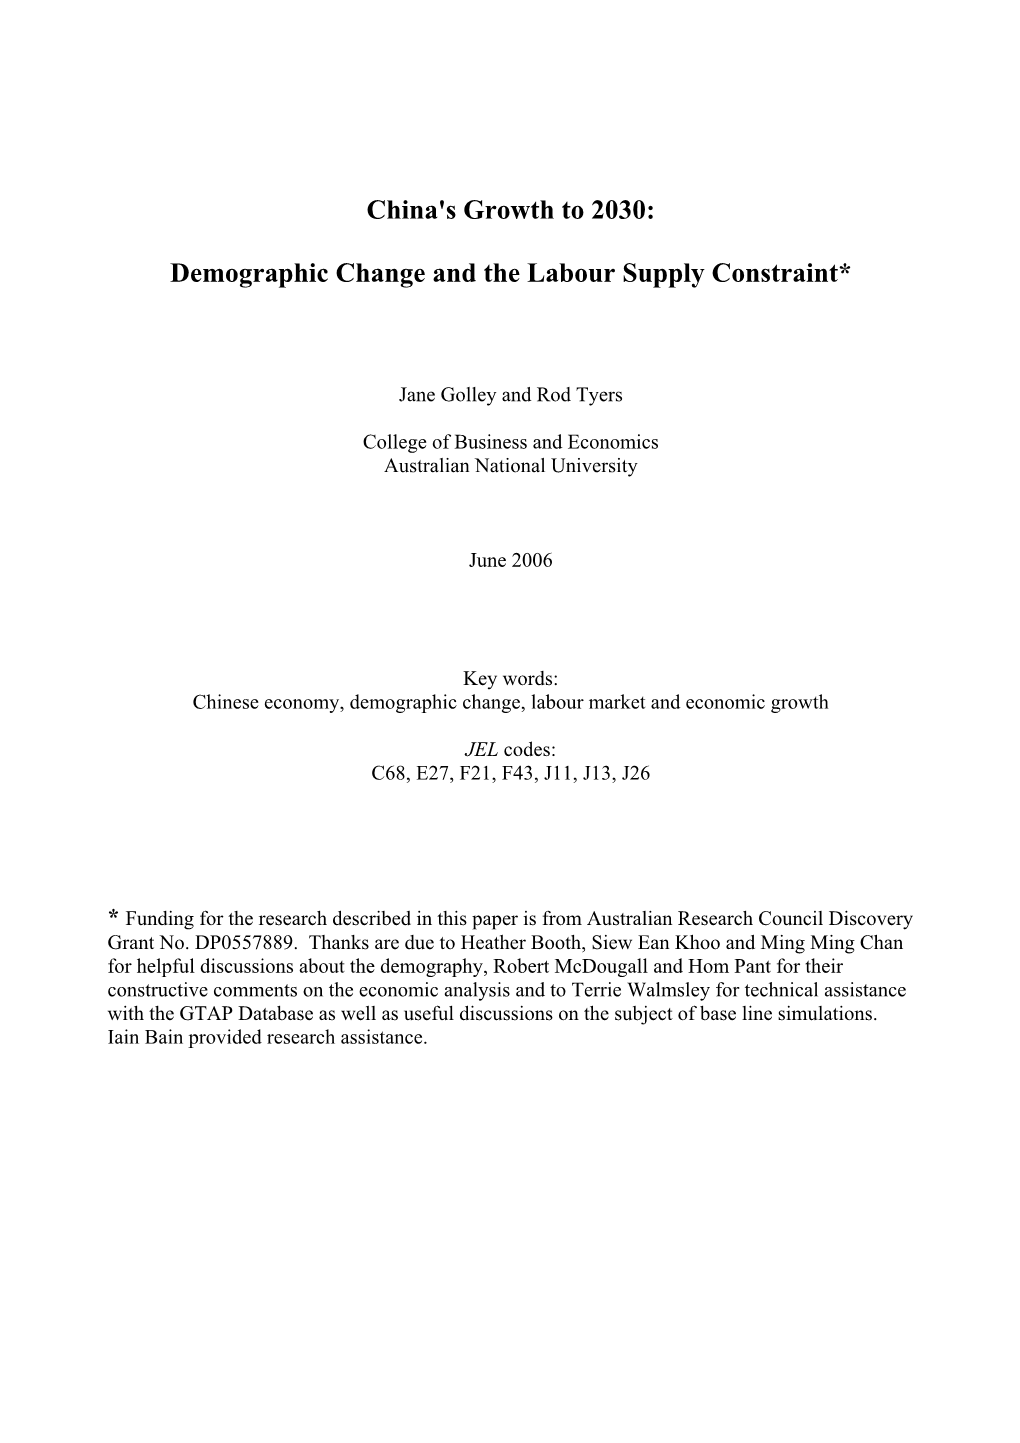 China's Growth to 2030: Demographic Change and the Labour Supply Constraint